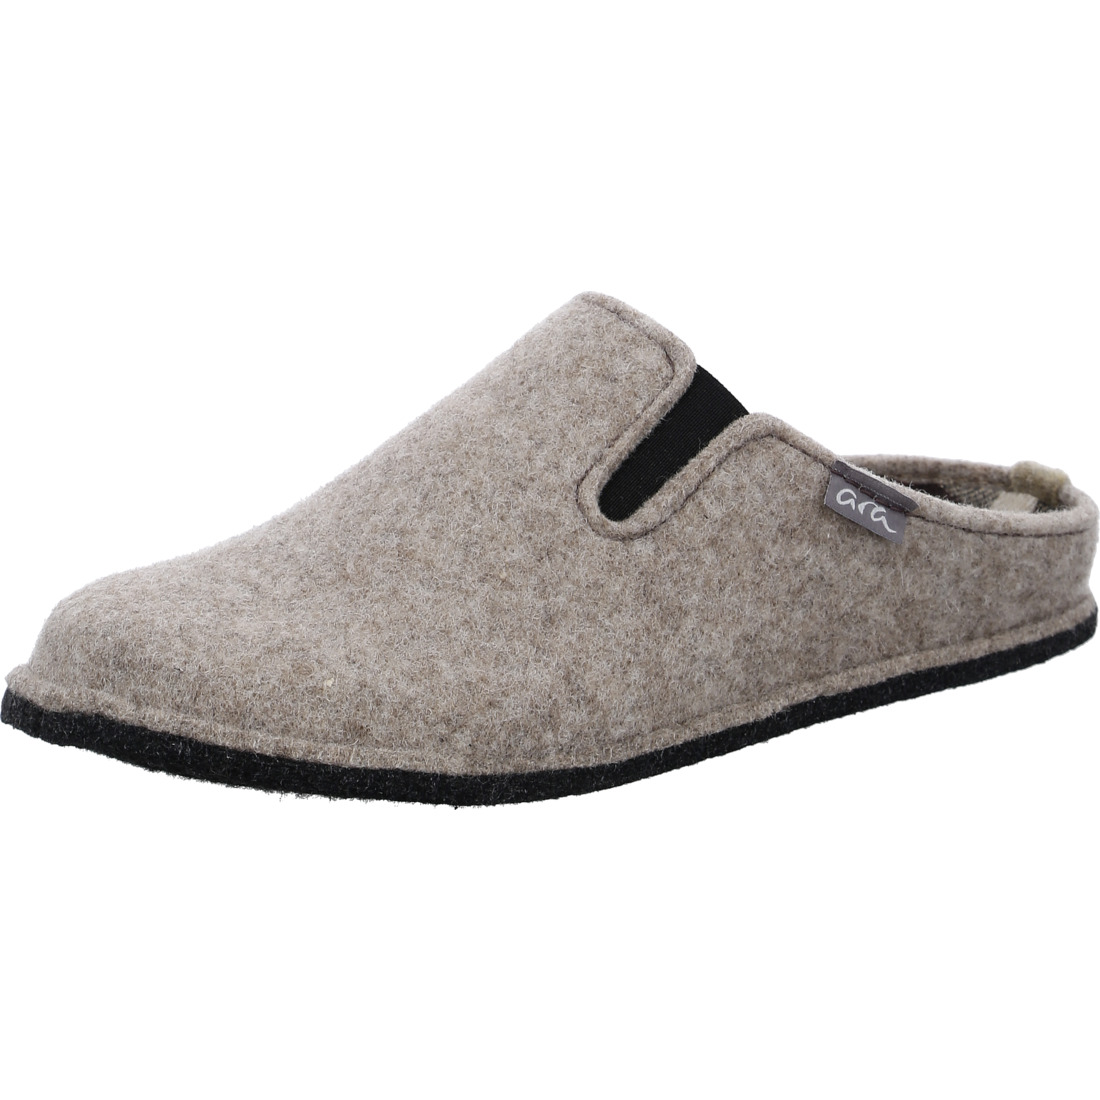 Mules*Ara Shoes Mules Chaussons Enzo beige